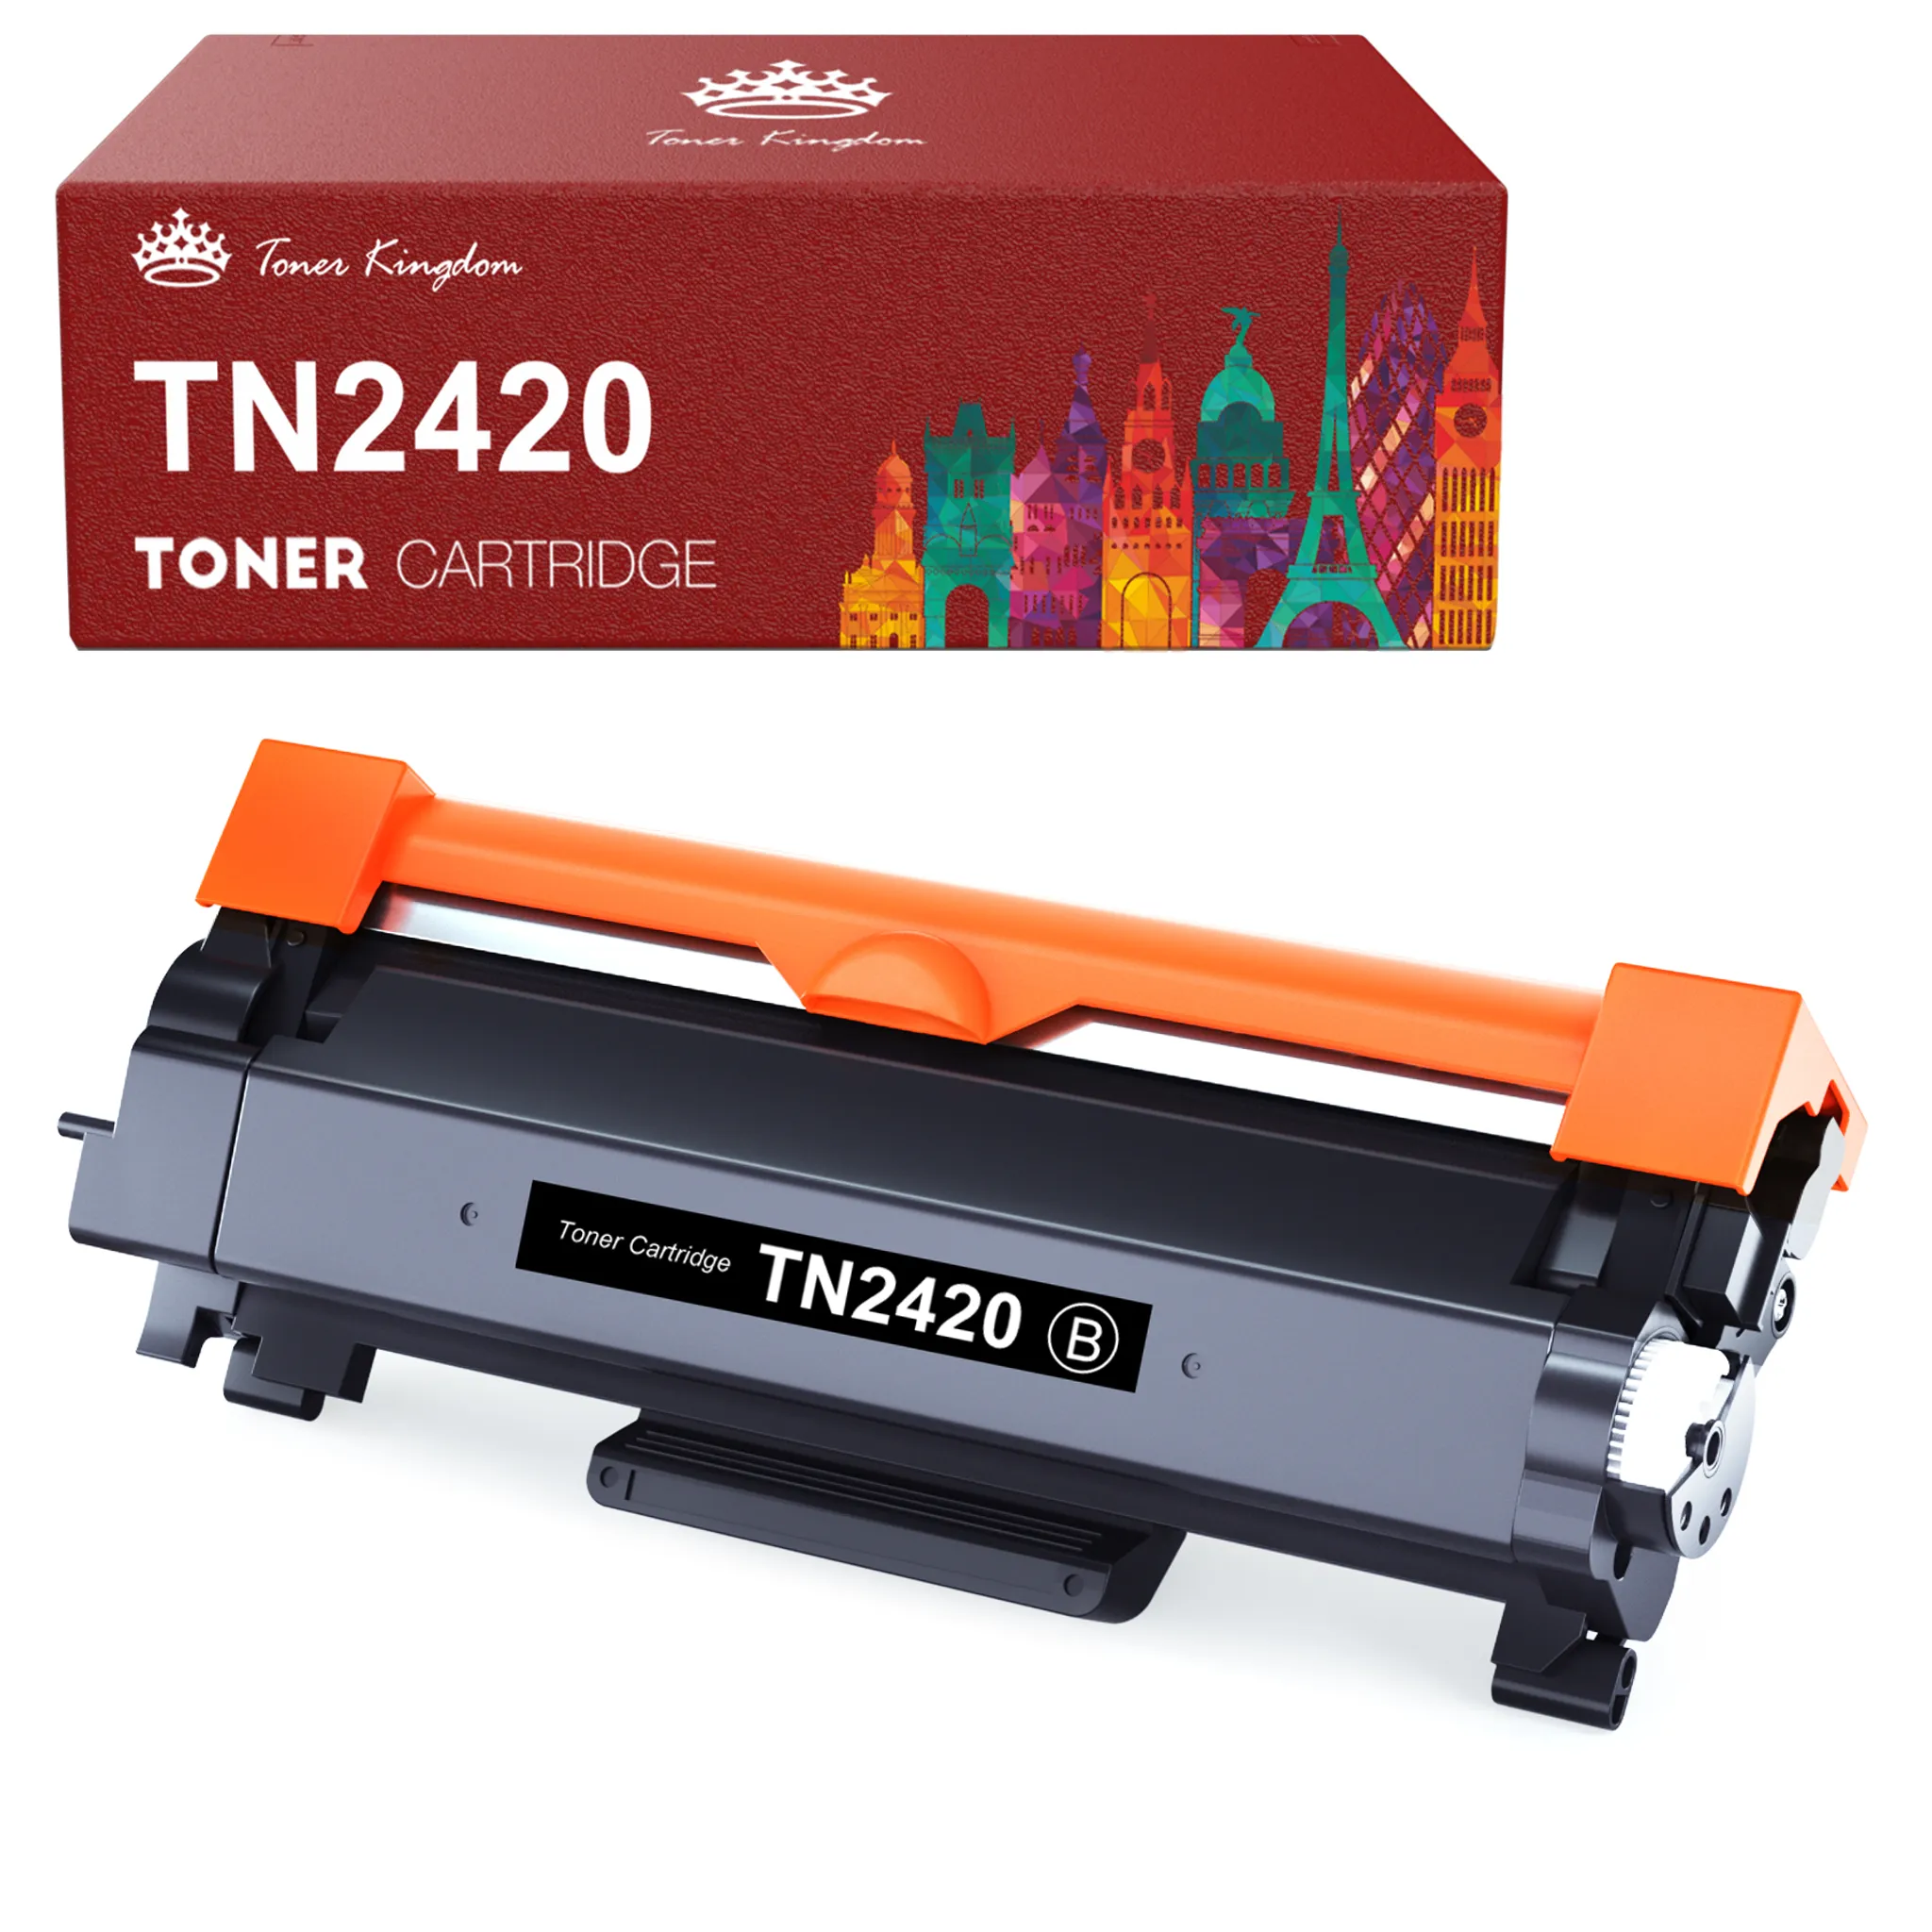 Black Point Toner Compatible with TN-2410 Black for Brother: HL: L2310D,  L2350DW, L2370DN, L2375DW; DCP: L2510D, L2530DW, L2550DN; MFC: L2710DN